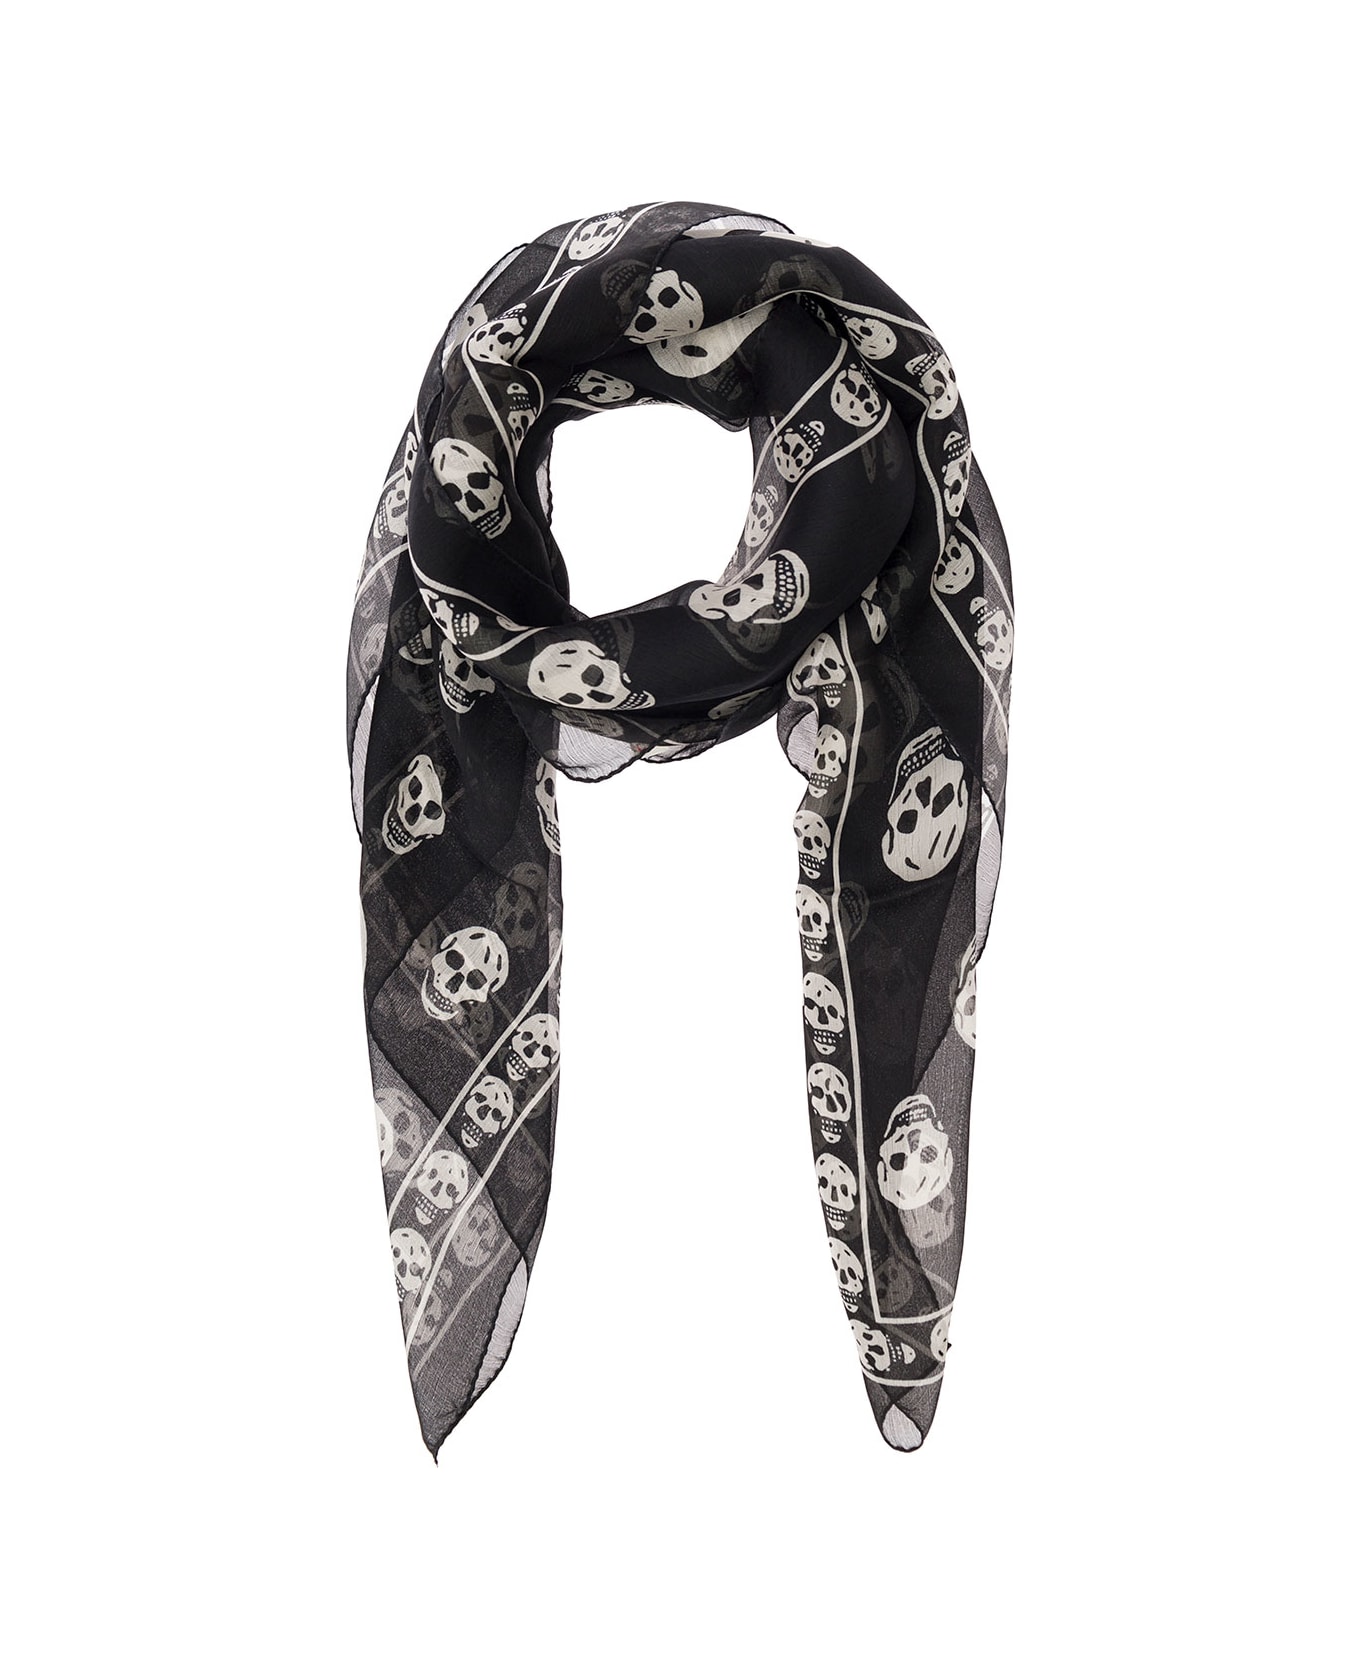 Alexander McQueen Black Scarf With Skull Print All-over In Modal Blend Woman - Black